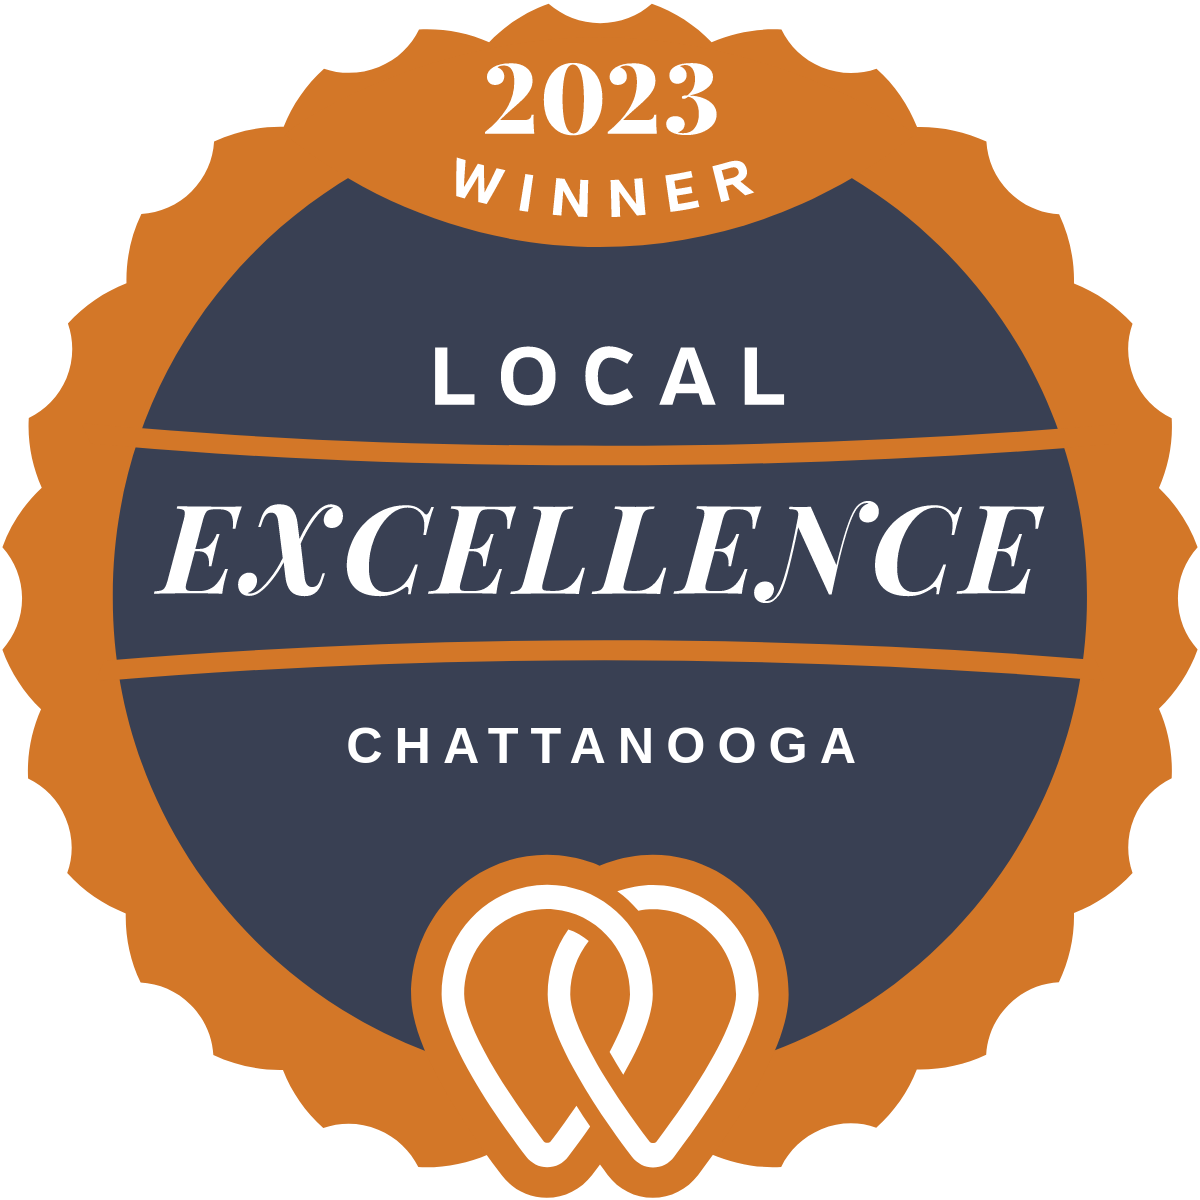 2023 Local Excellence Winner in Chattanooga, TN